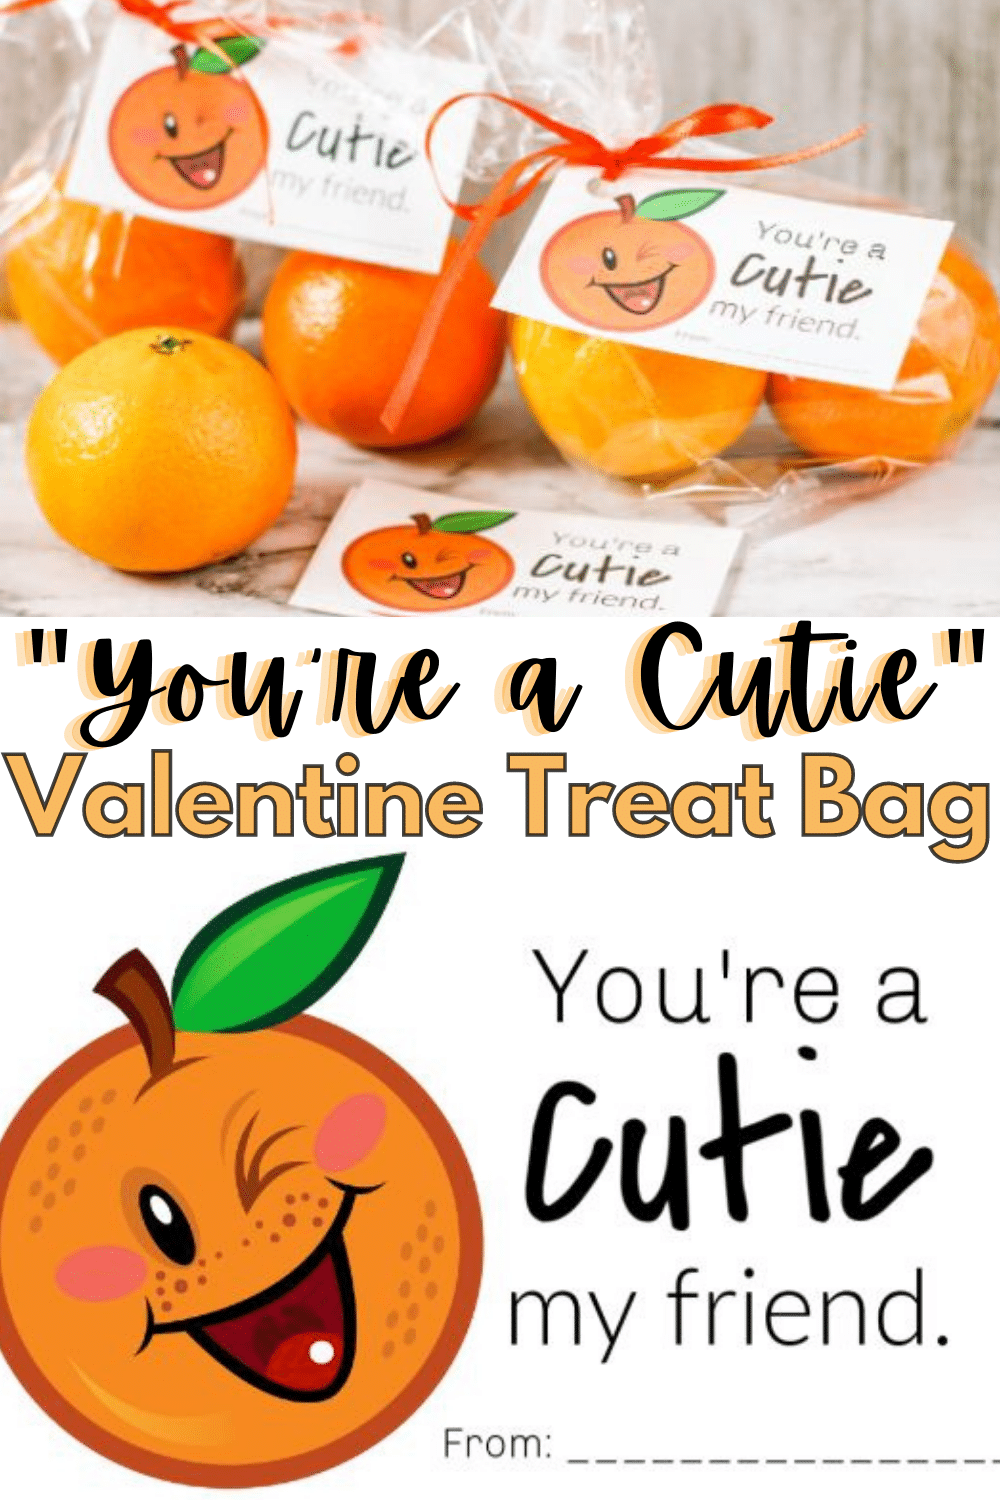 These cutie valentine treat bags are adorable and a great non-candy alternative for Valentine's Day. Instructions include a free "You're a Cutie" printable! #homemade #valentine #noncandy via @wondermomwannab